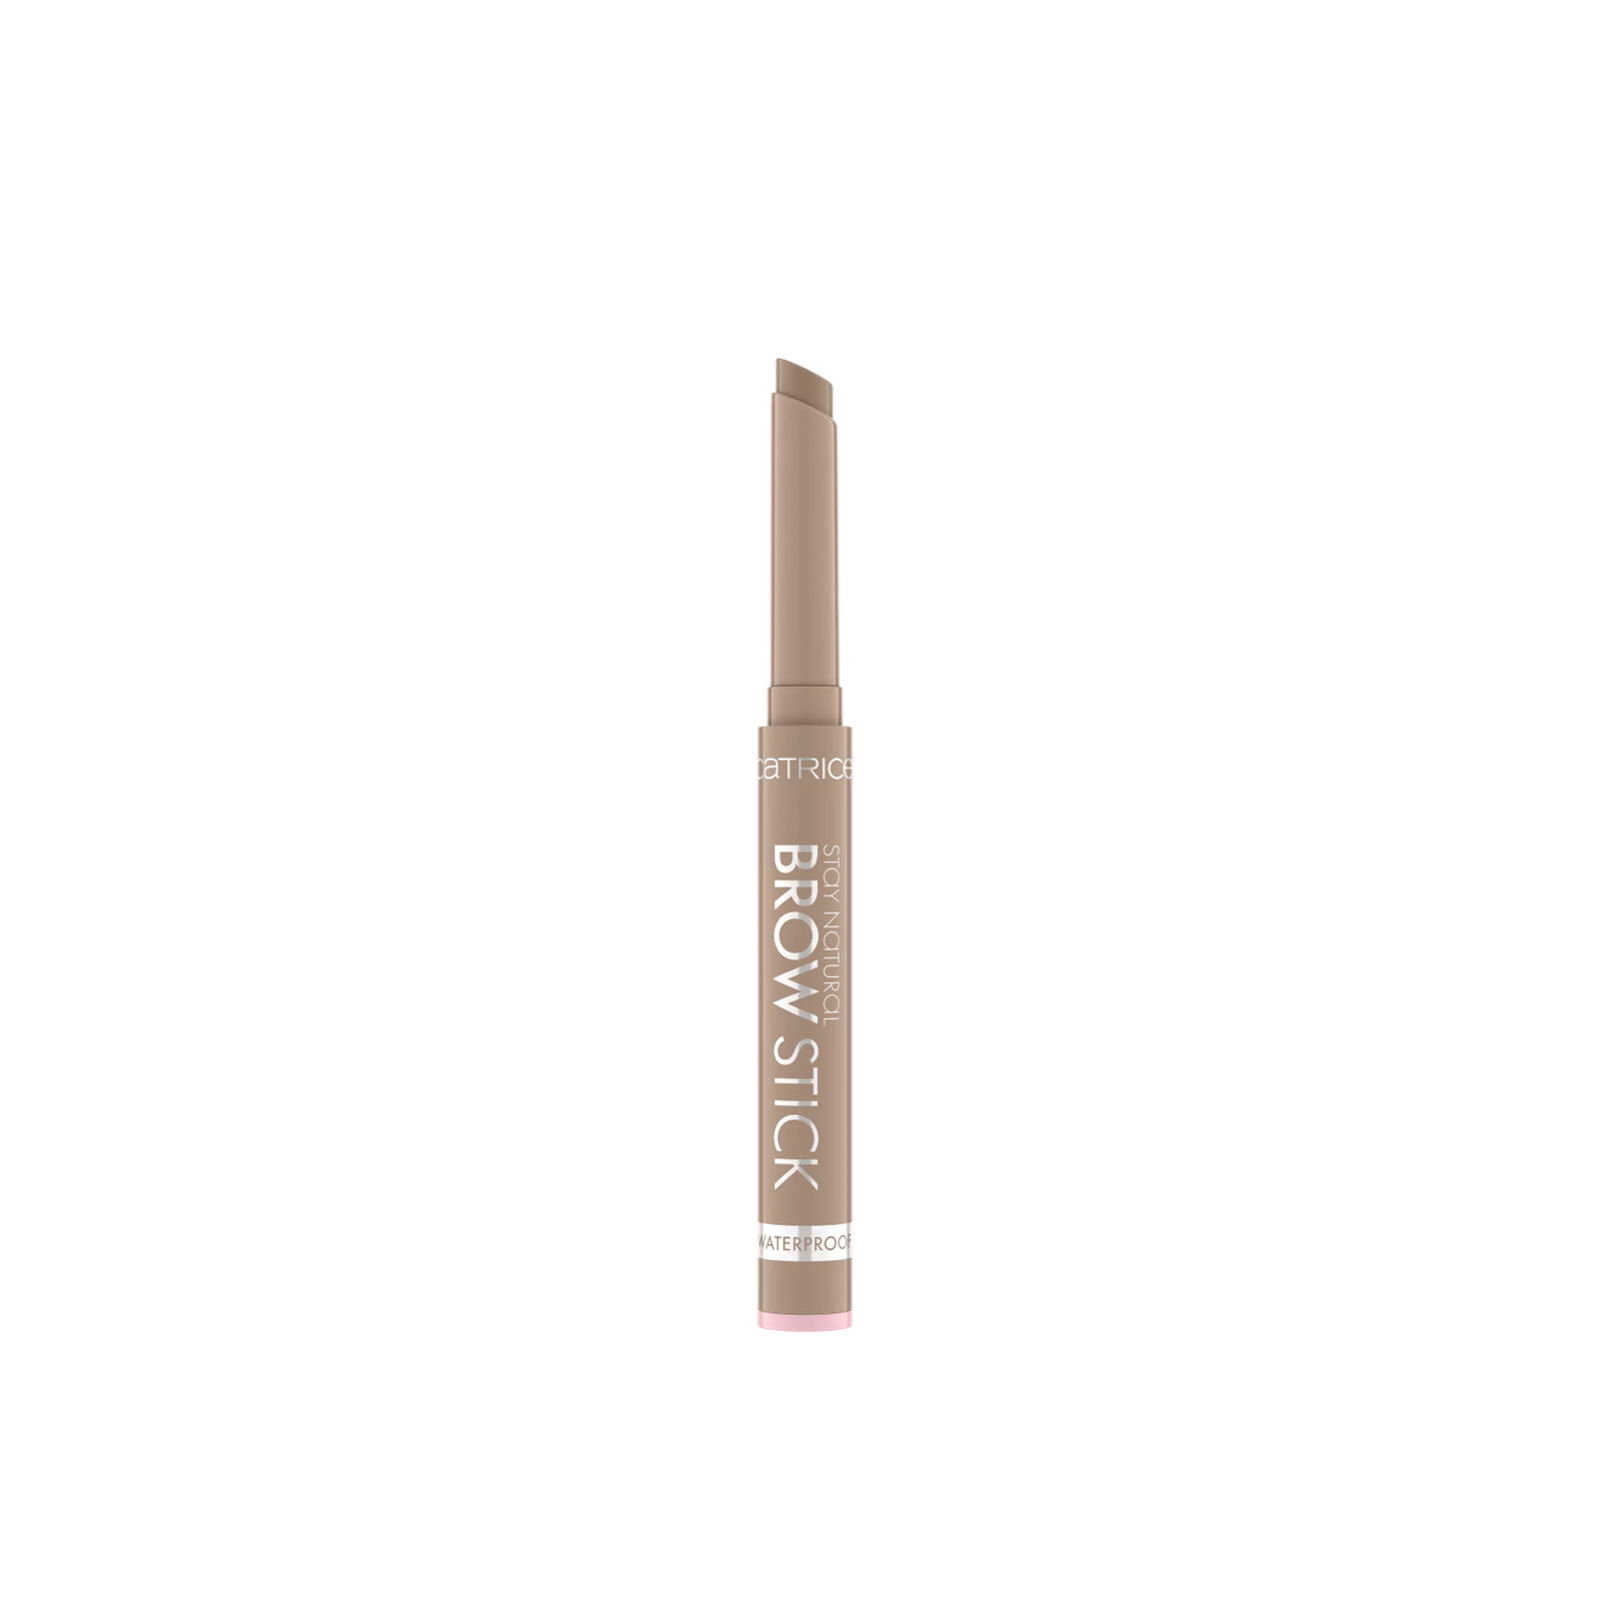 Catrice Stay Natural Waterproof Brow Stick 020 Soft Medium Brown 1g (0.03 oz)